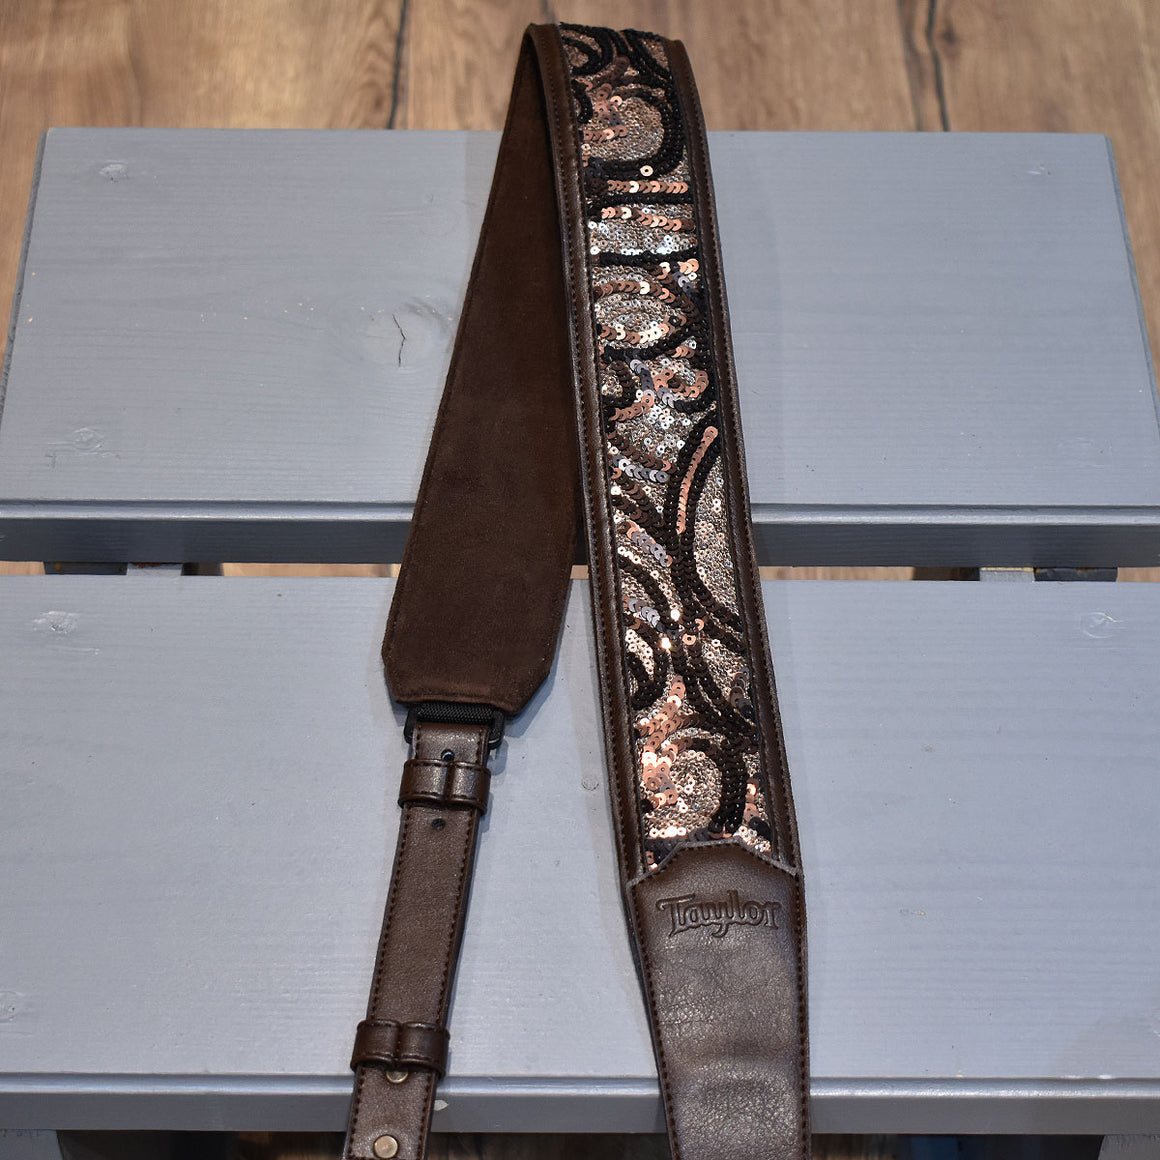 Taylor Guitar Strap Vegan Leather Style Chocolate Brown Sequins 2.25”